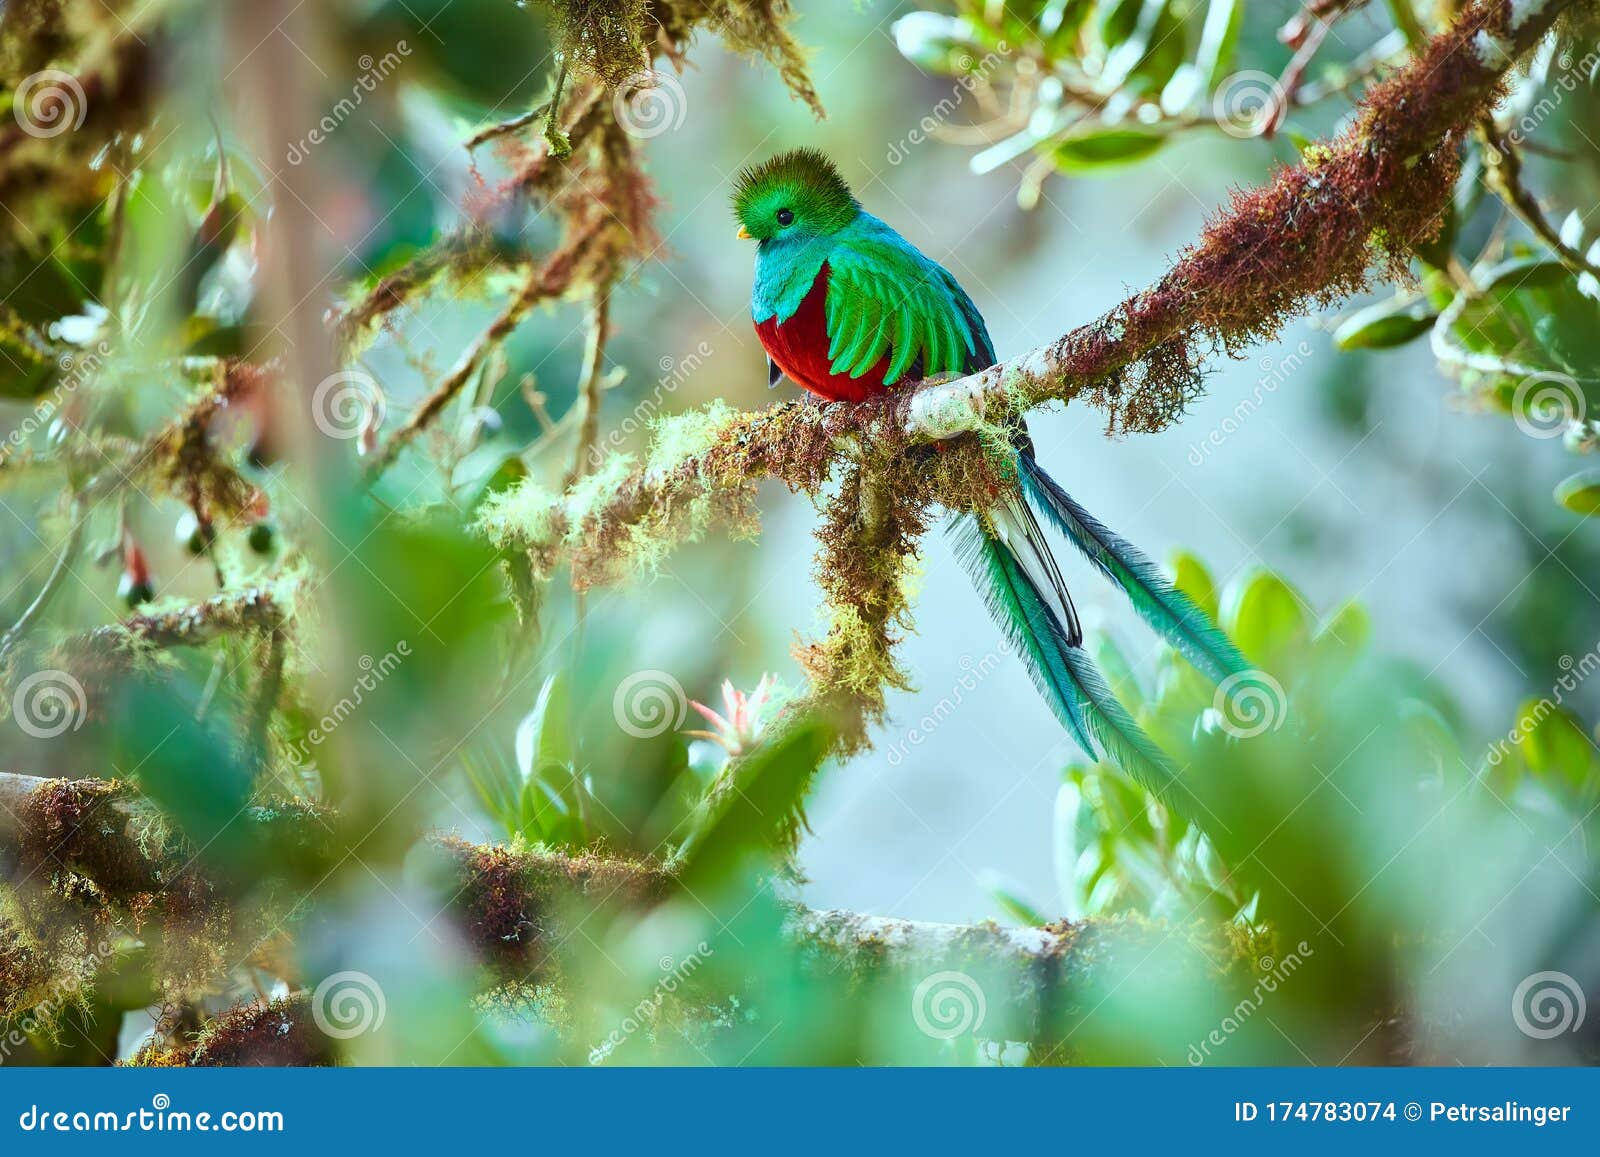 the most beautiful bird of central america. resplendent quetzal pharomachrus mocinno sitting ma branches covered with moss.